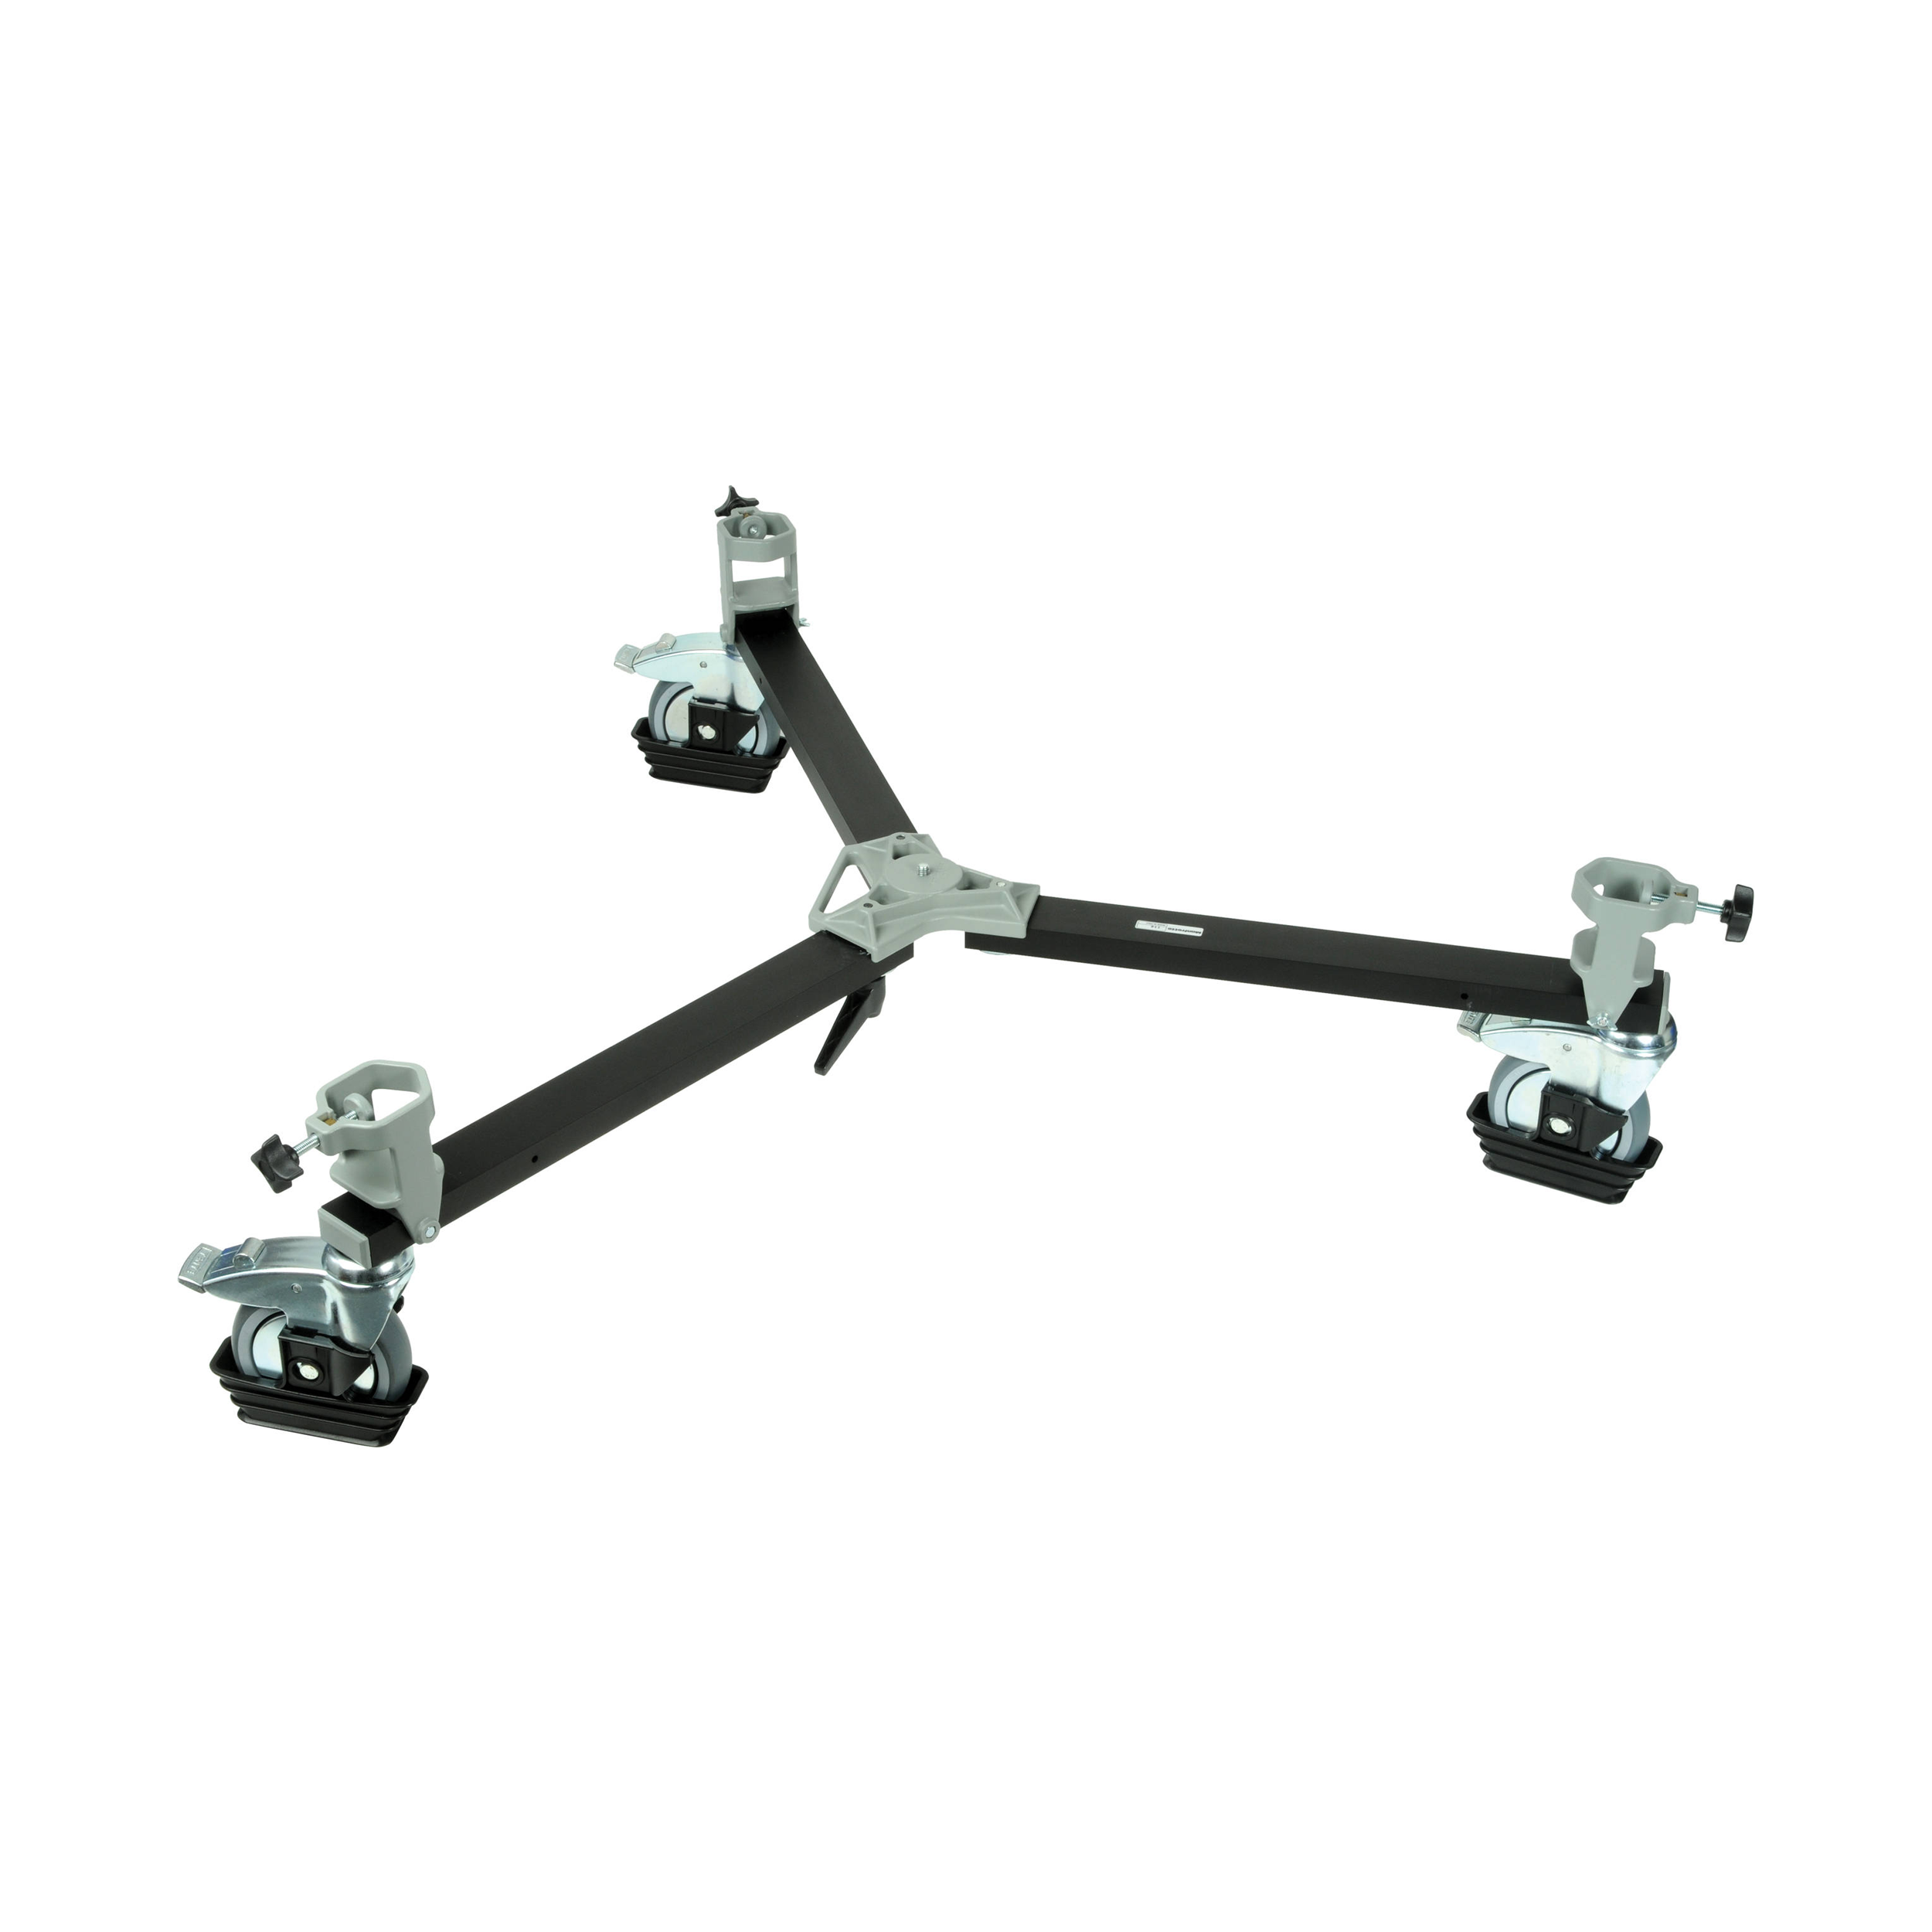 Manfrotto 114 Heavy-Duty Cine/Video Dolly for Tripods with Round Feet